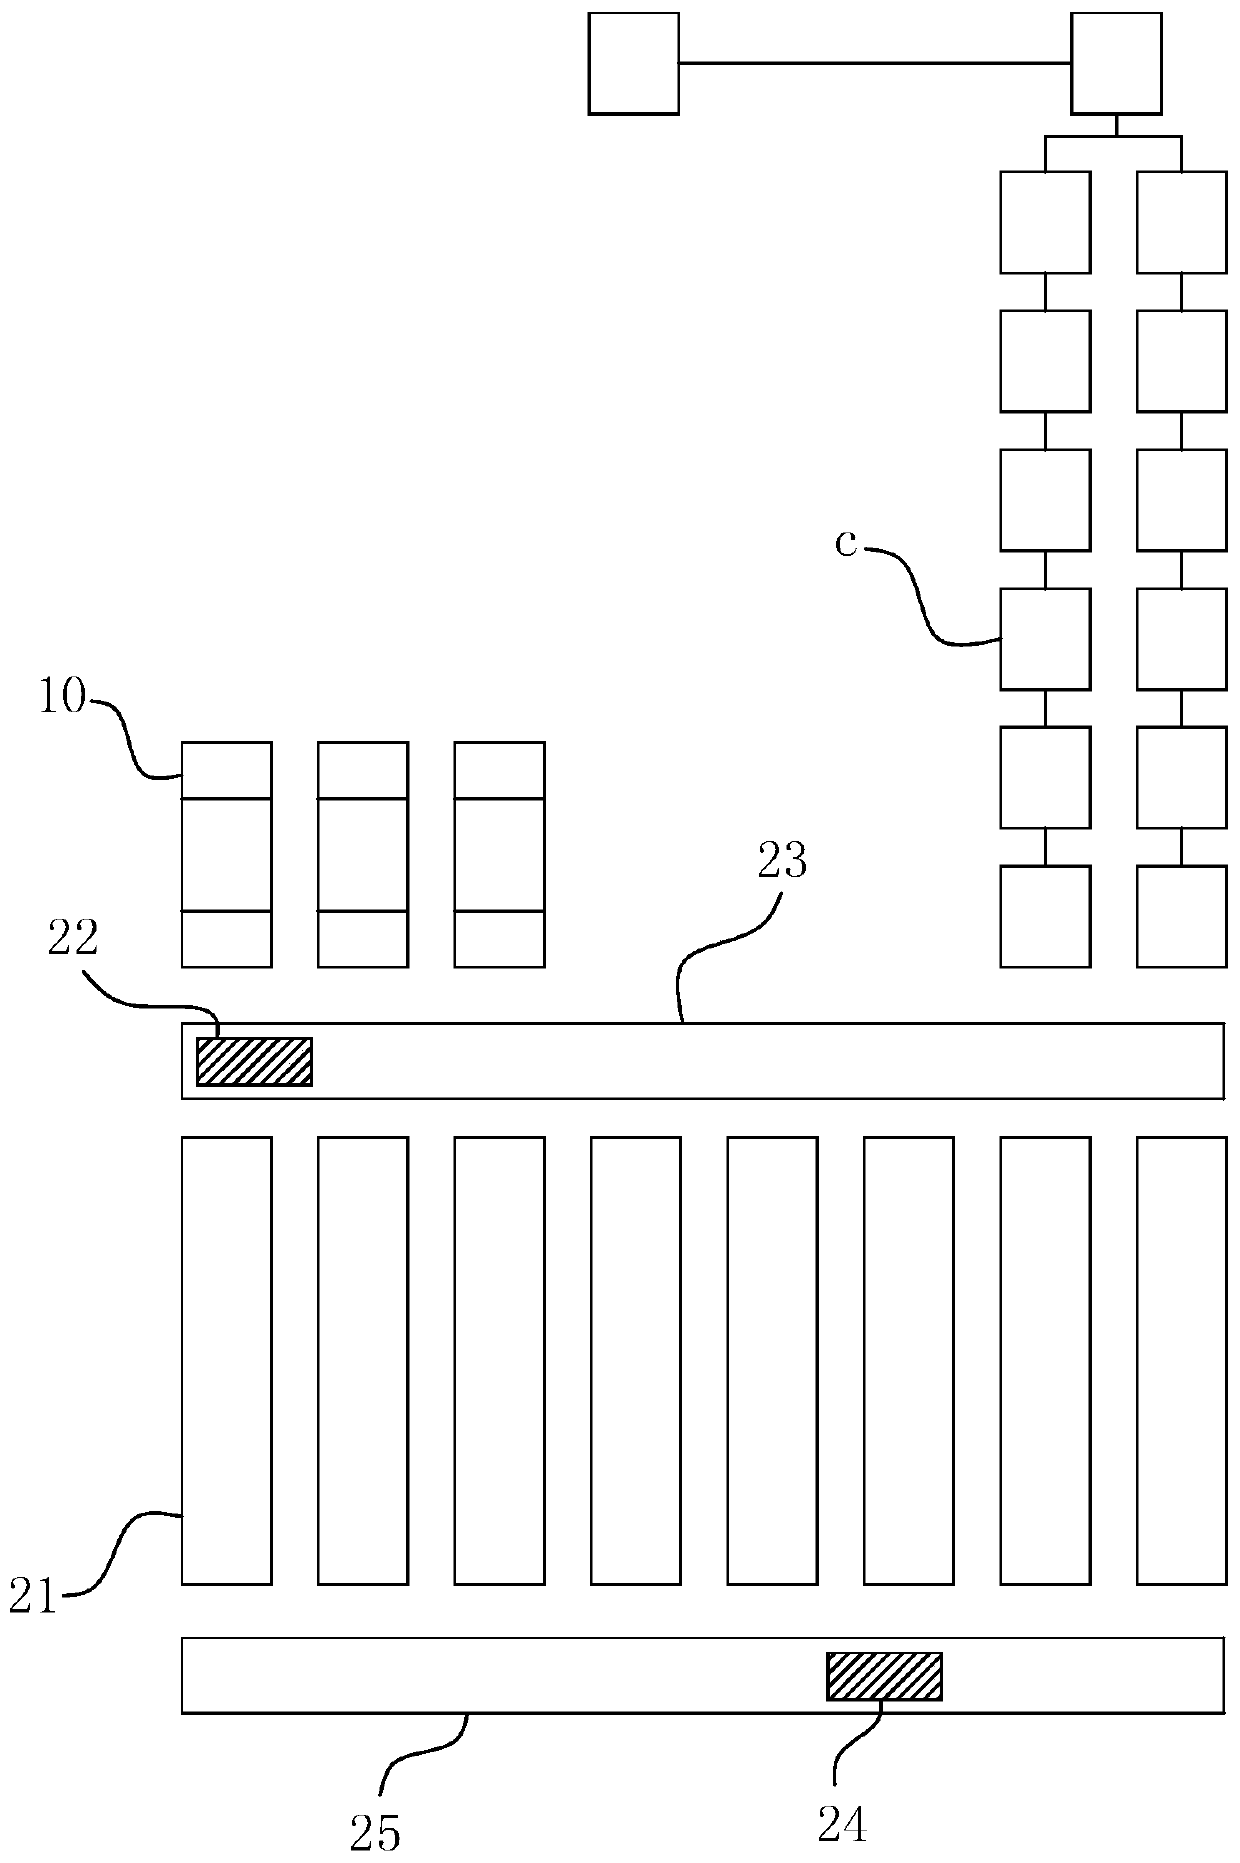 Fully automatic intelligent logistics system and method for carton production